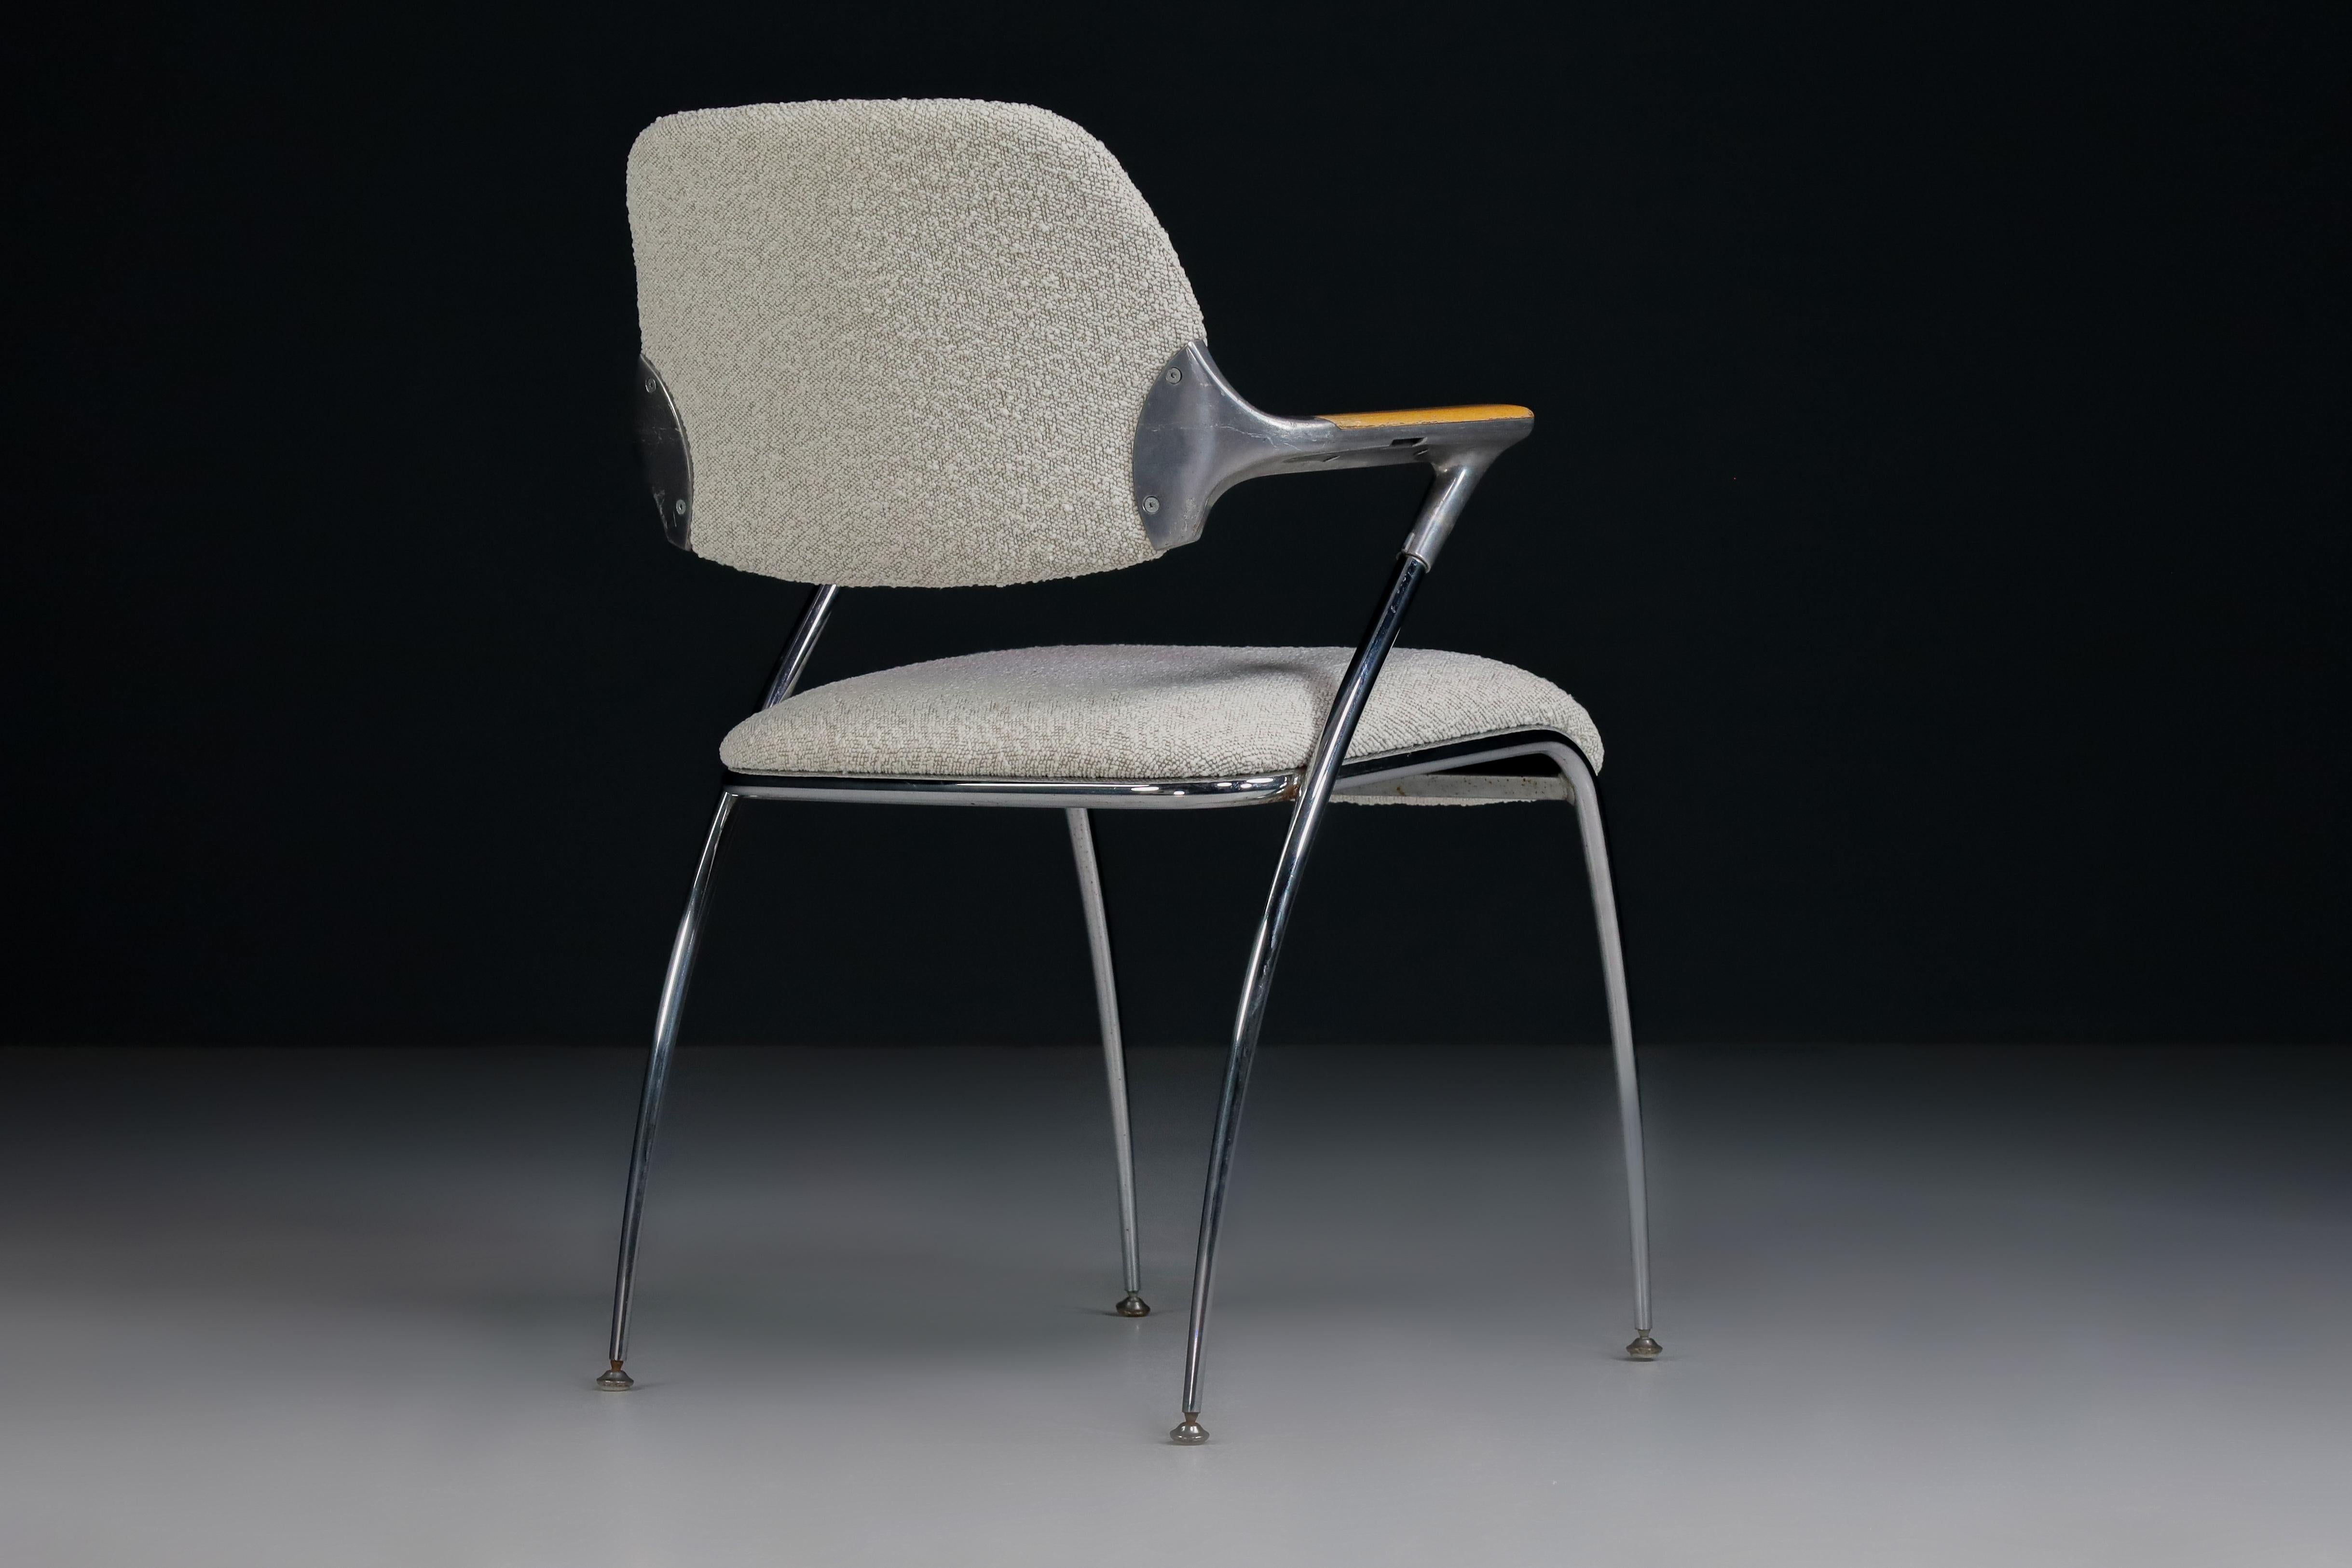 Aluminium Francesco Zaccone for Thonet Golf Chairs in New Bouclé Upholstery, Allemagne 1970 en vente